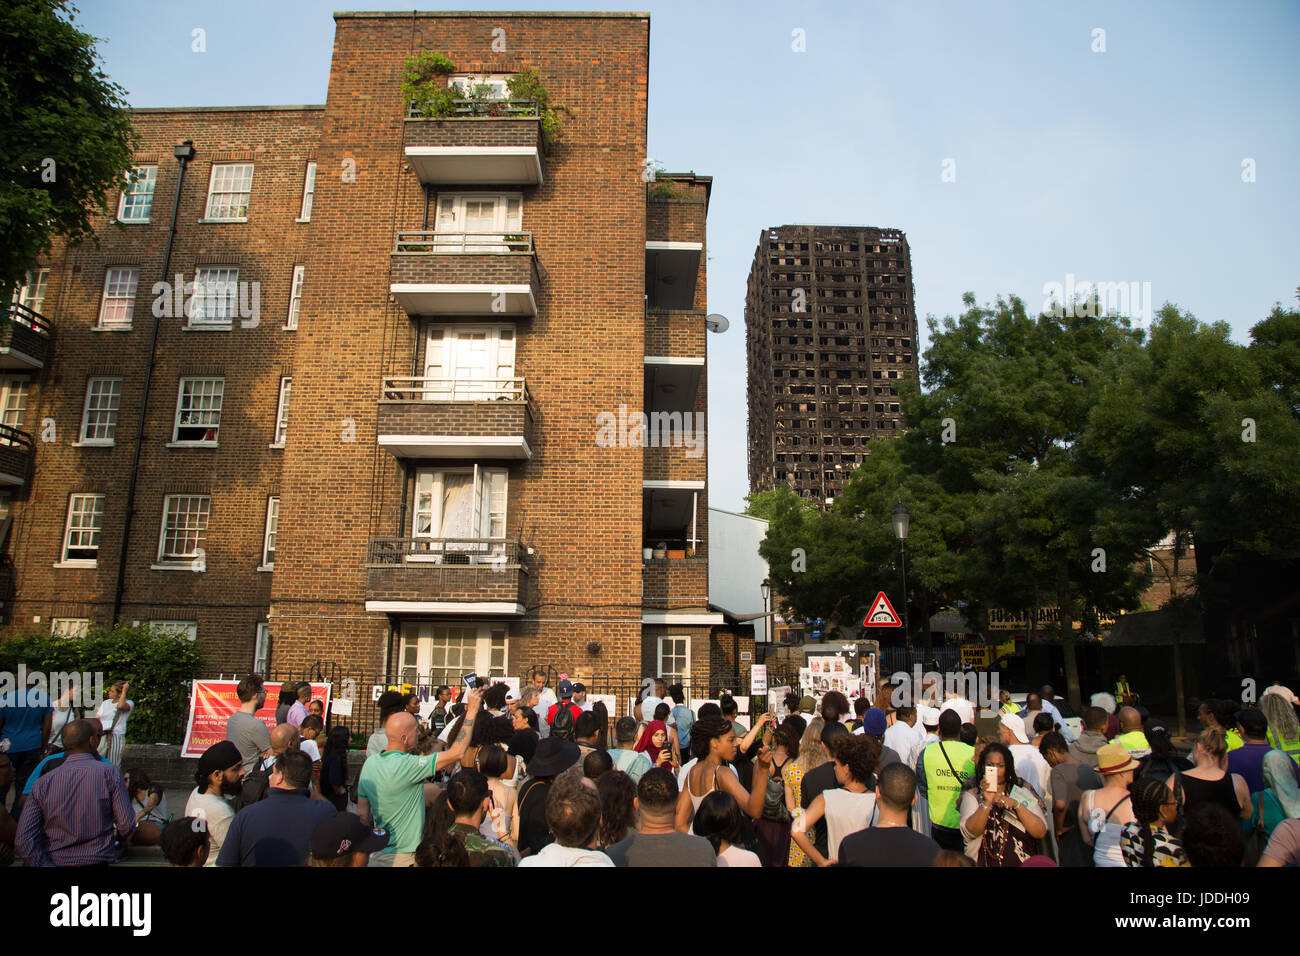 London, UK. 19th June, 2017. People look at the shell of Grenfell tower block during the launch of Justice for Grenfell campaign in West London. seventy-nine people are presumed missing or dead after the 24 storey residential Grenfell Tower block in Latimer Road was engulfed in flames in the early hours of June 14. Credit: Thabo Jaiyesimi/Alamy Live News Stock Photo